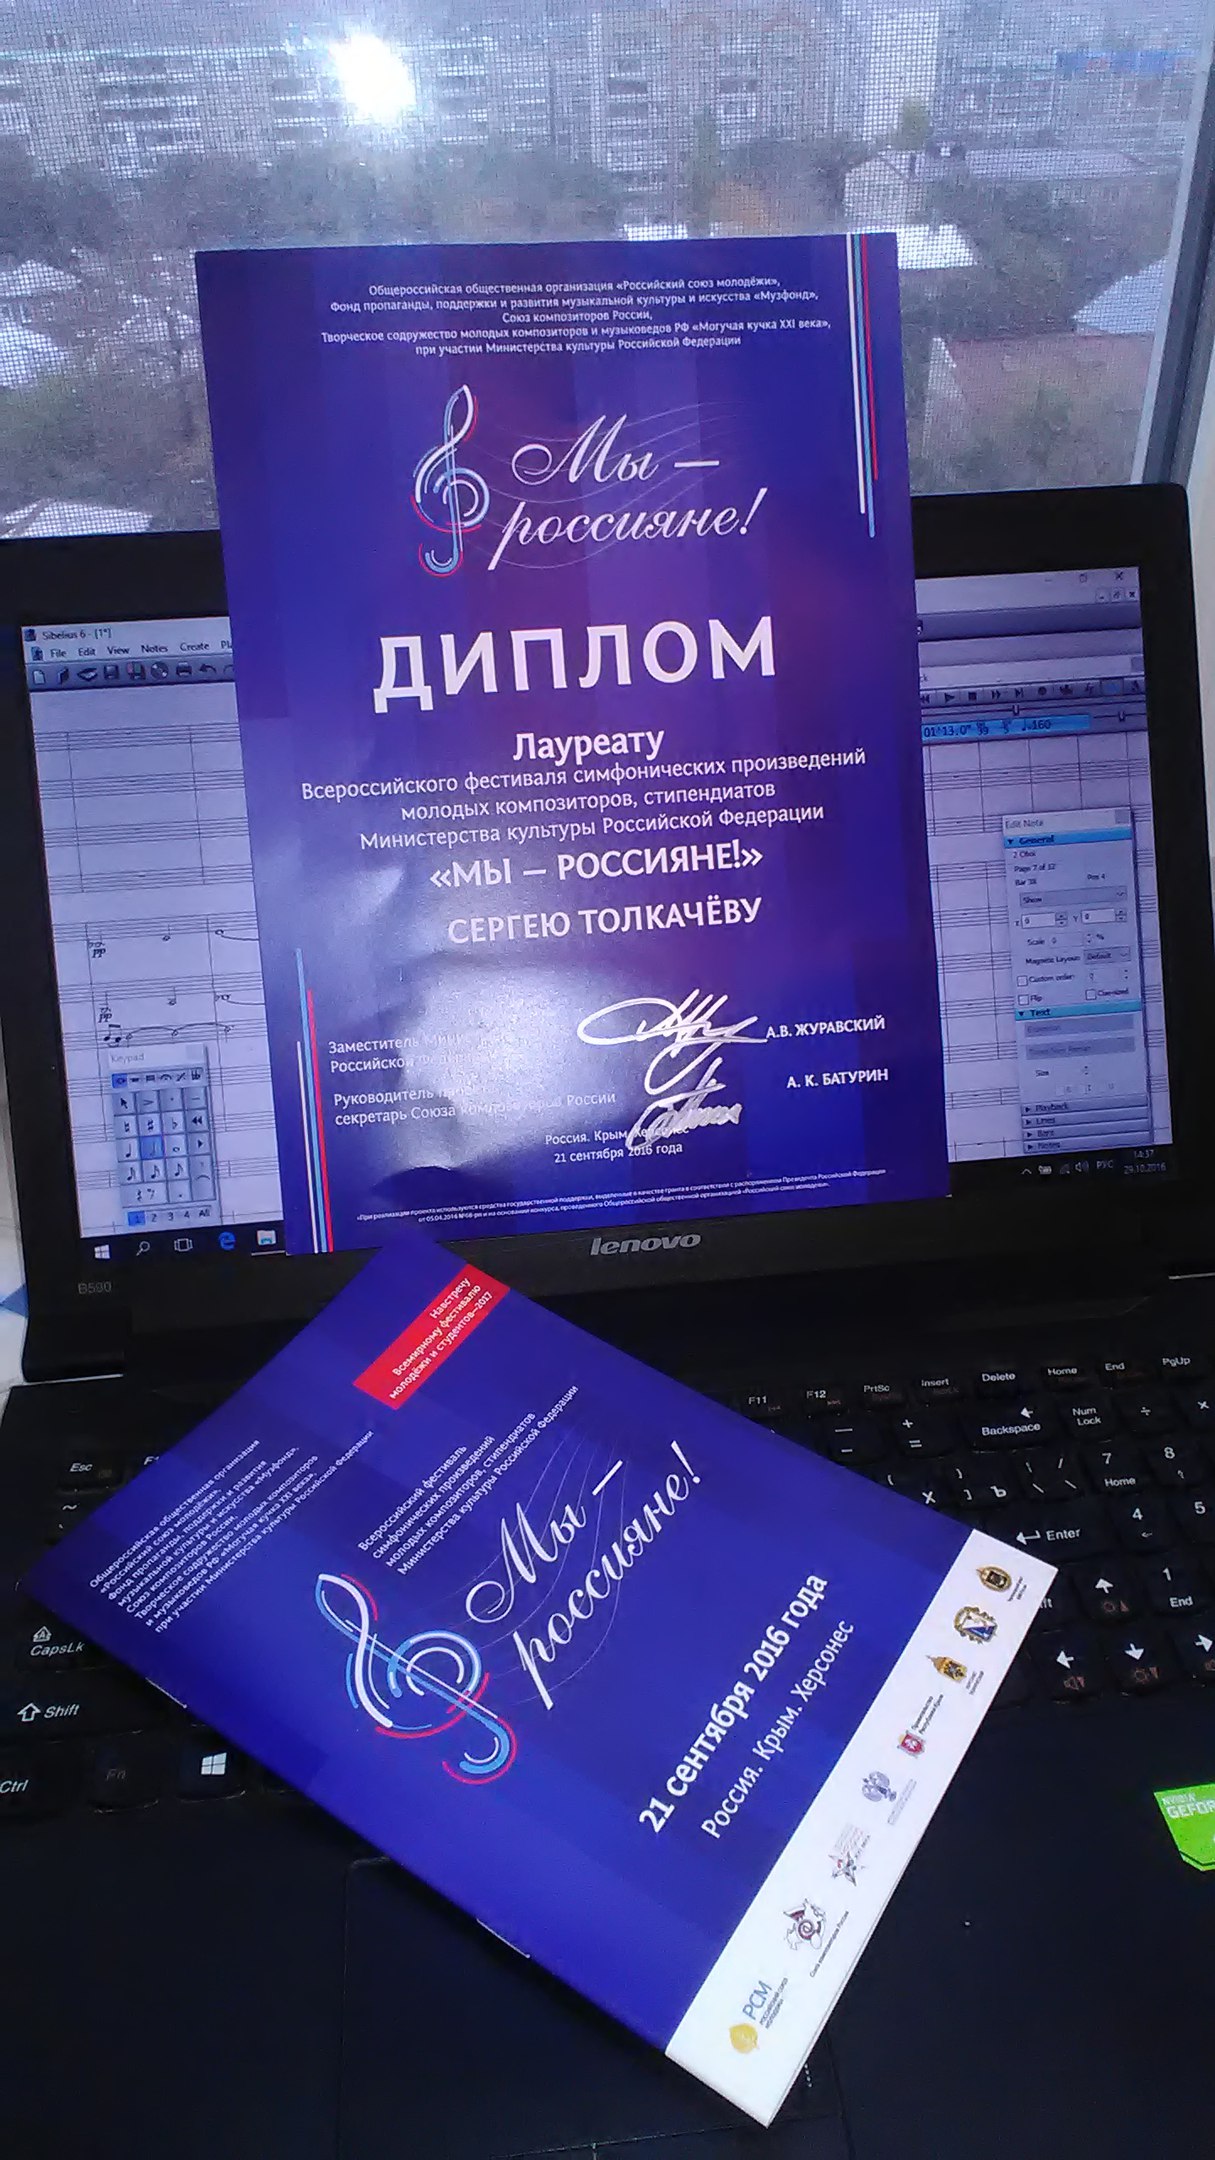 The diploma of National Festival of Young Composers We - the Russians!